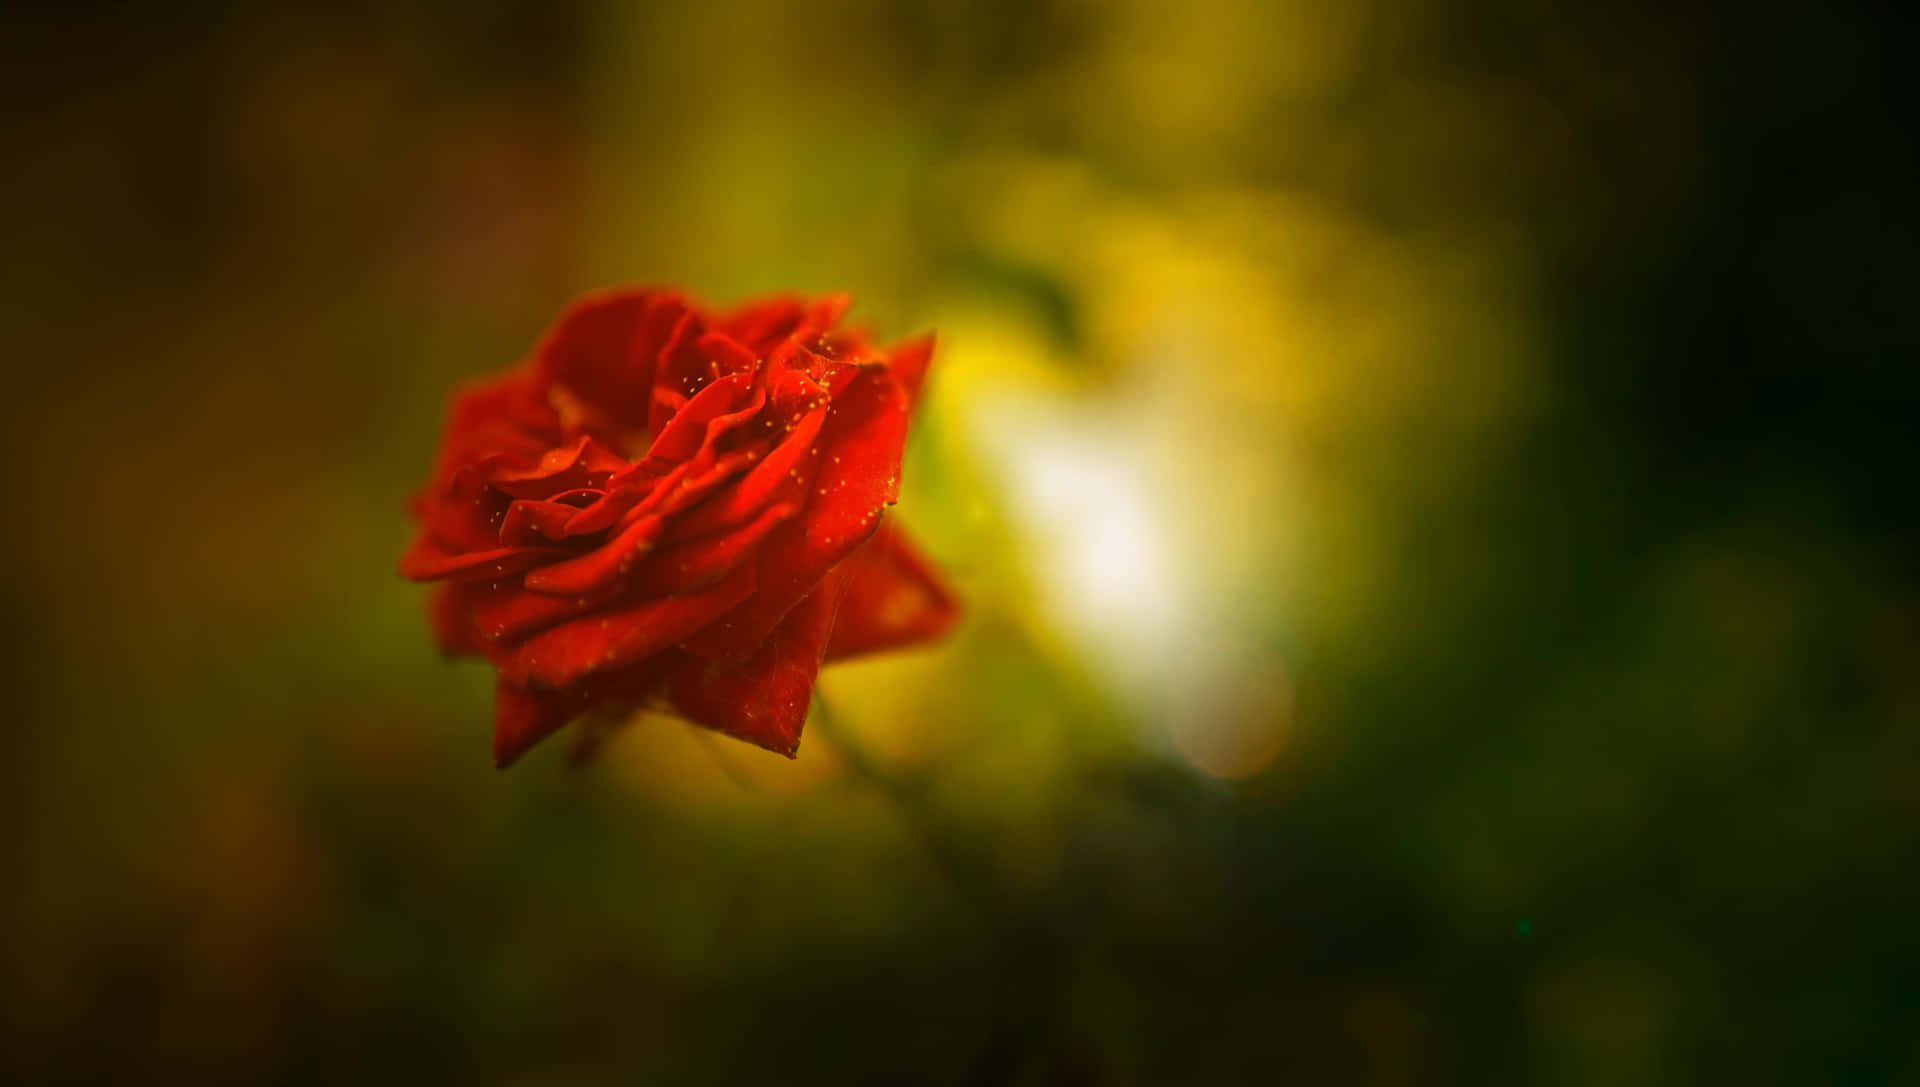 A Red Rose In The Background With Blurred Background